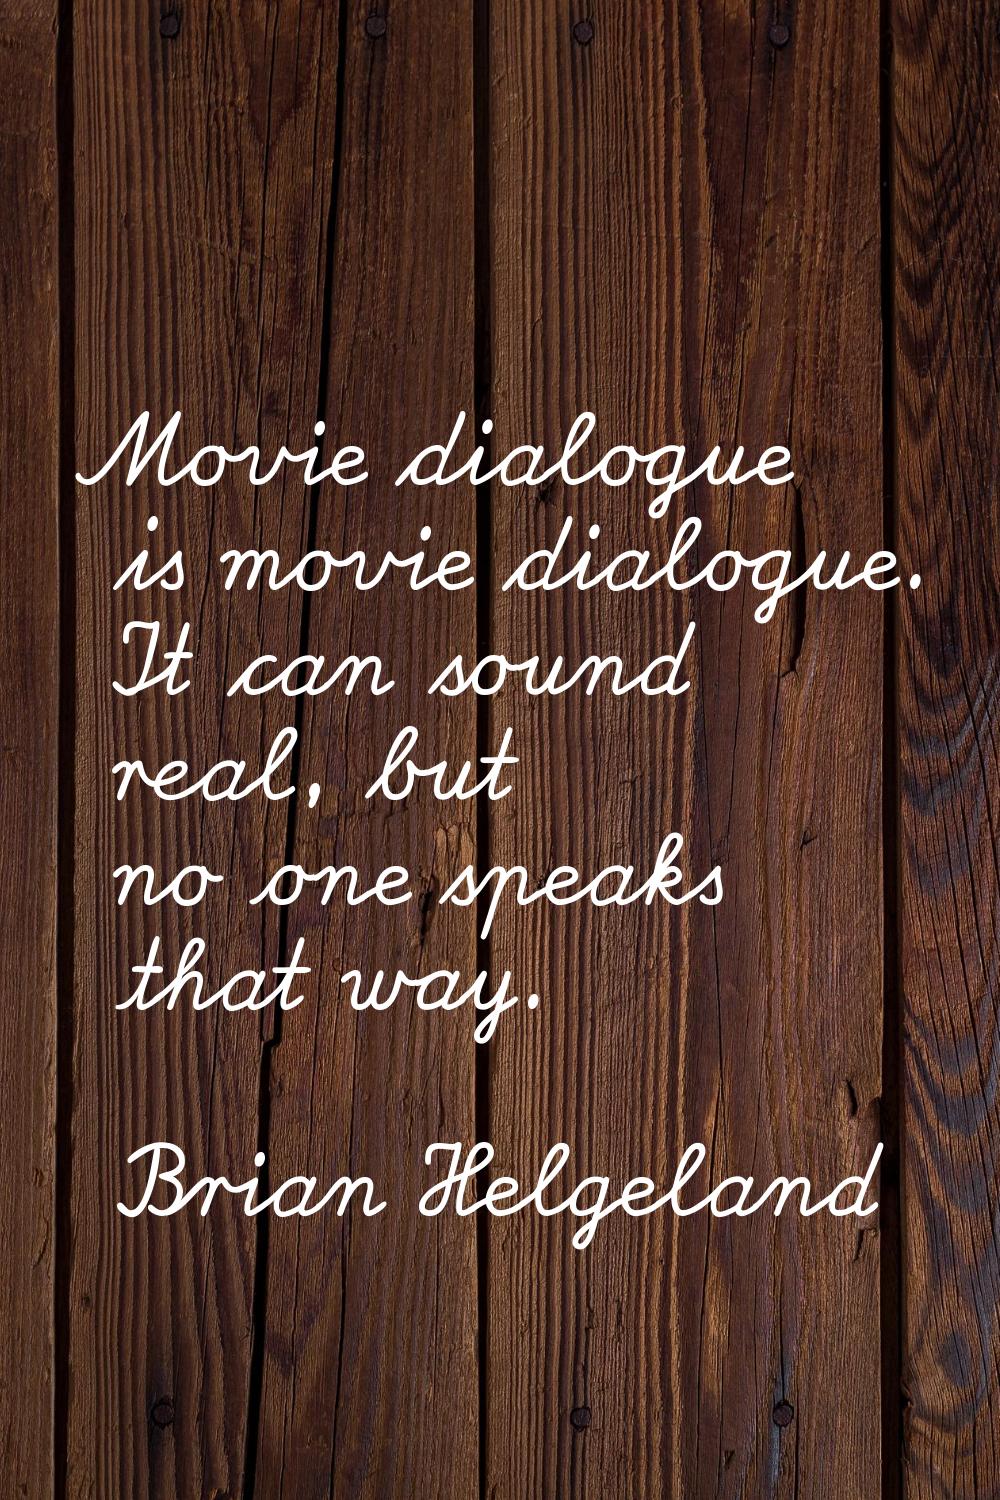 Movie dialogue is movie dialogue. It can sound real, but no one speaks that way.